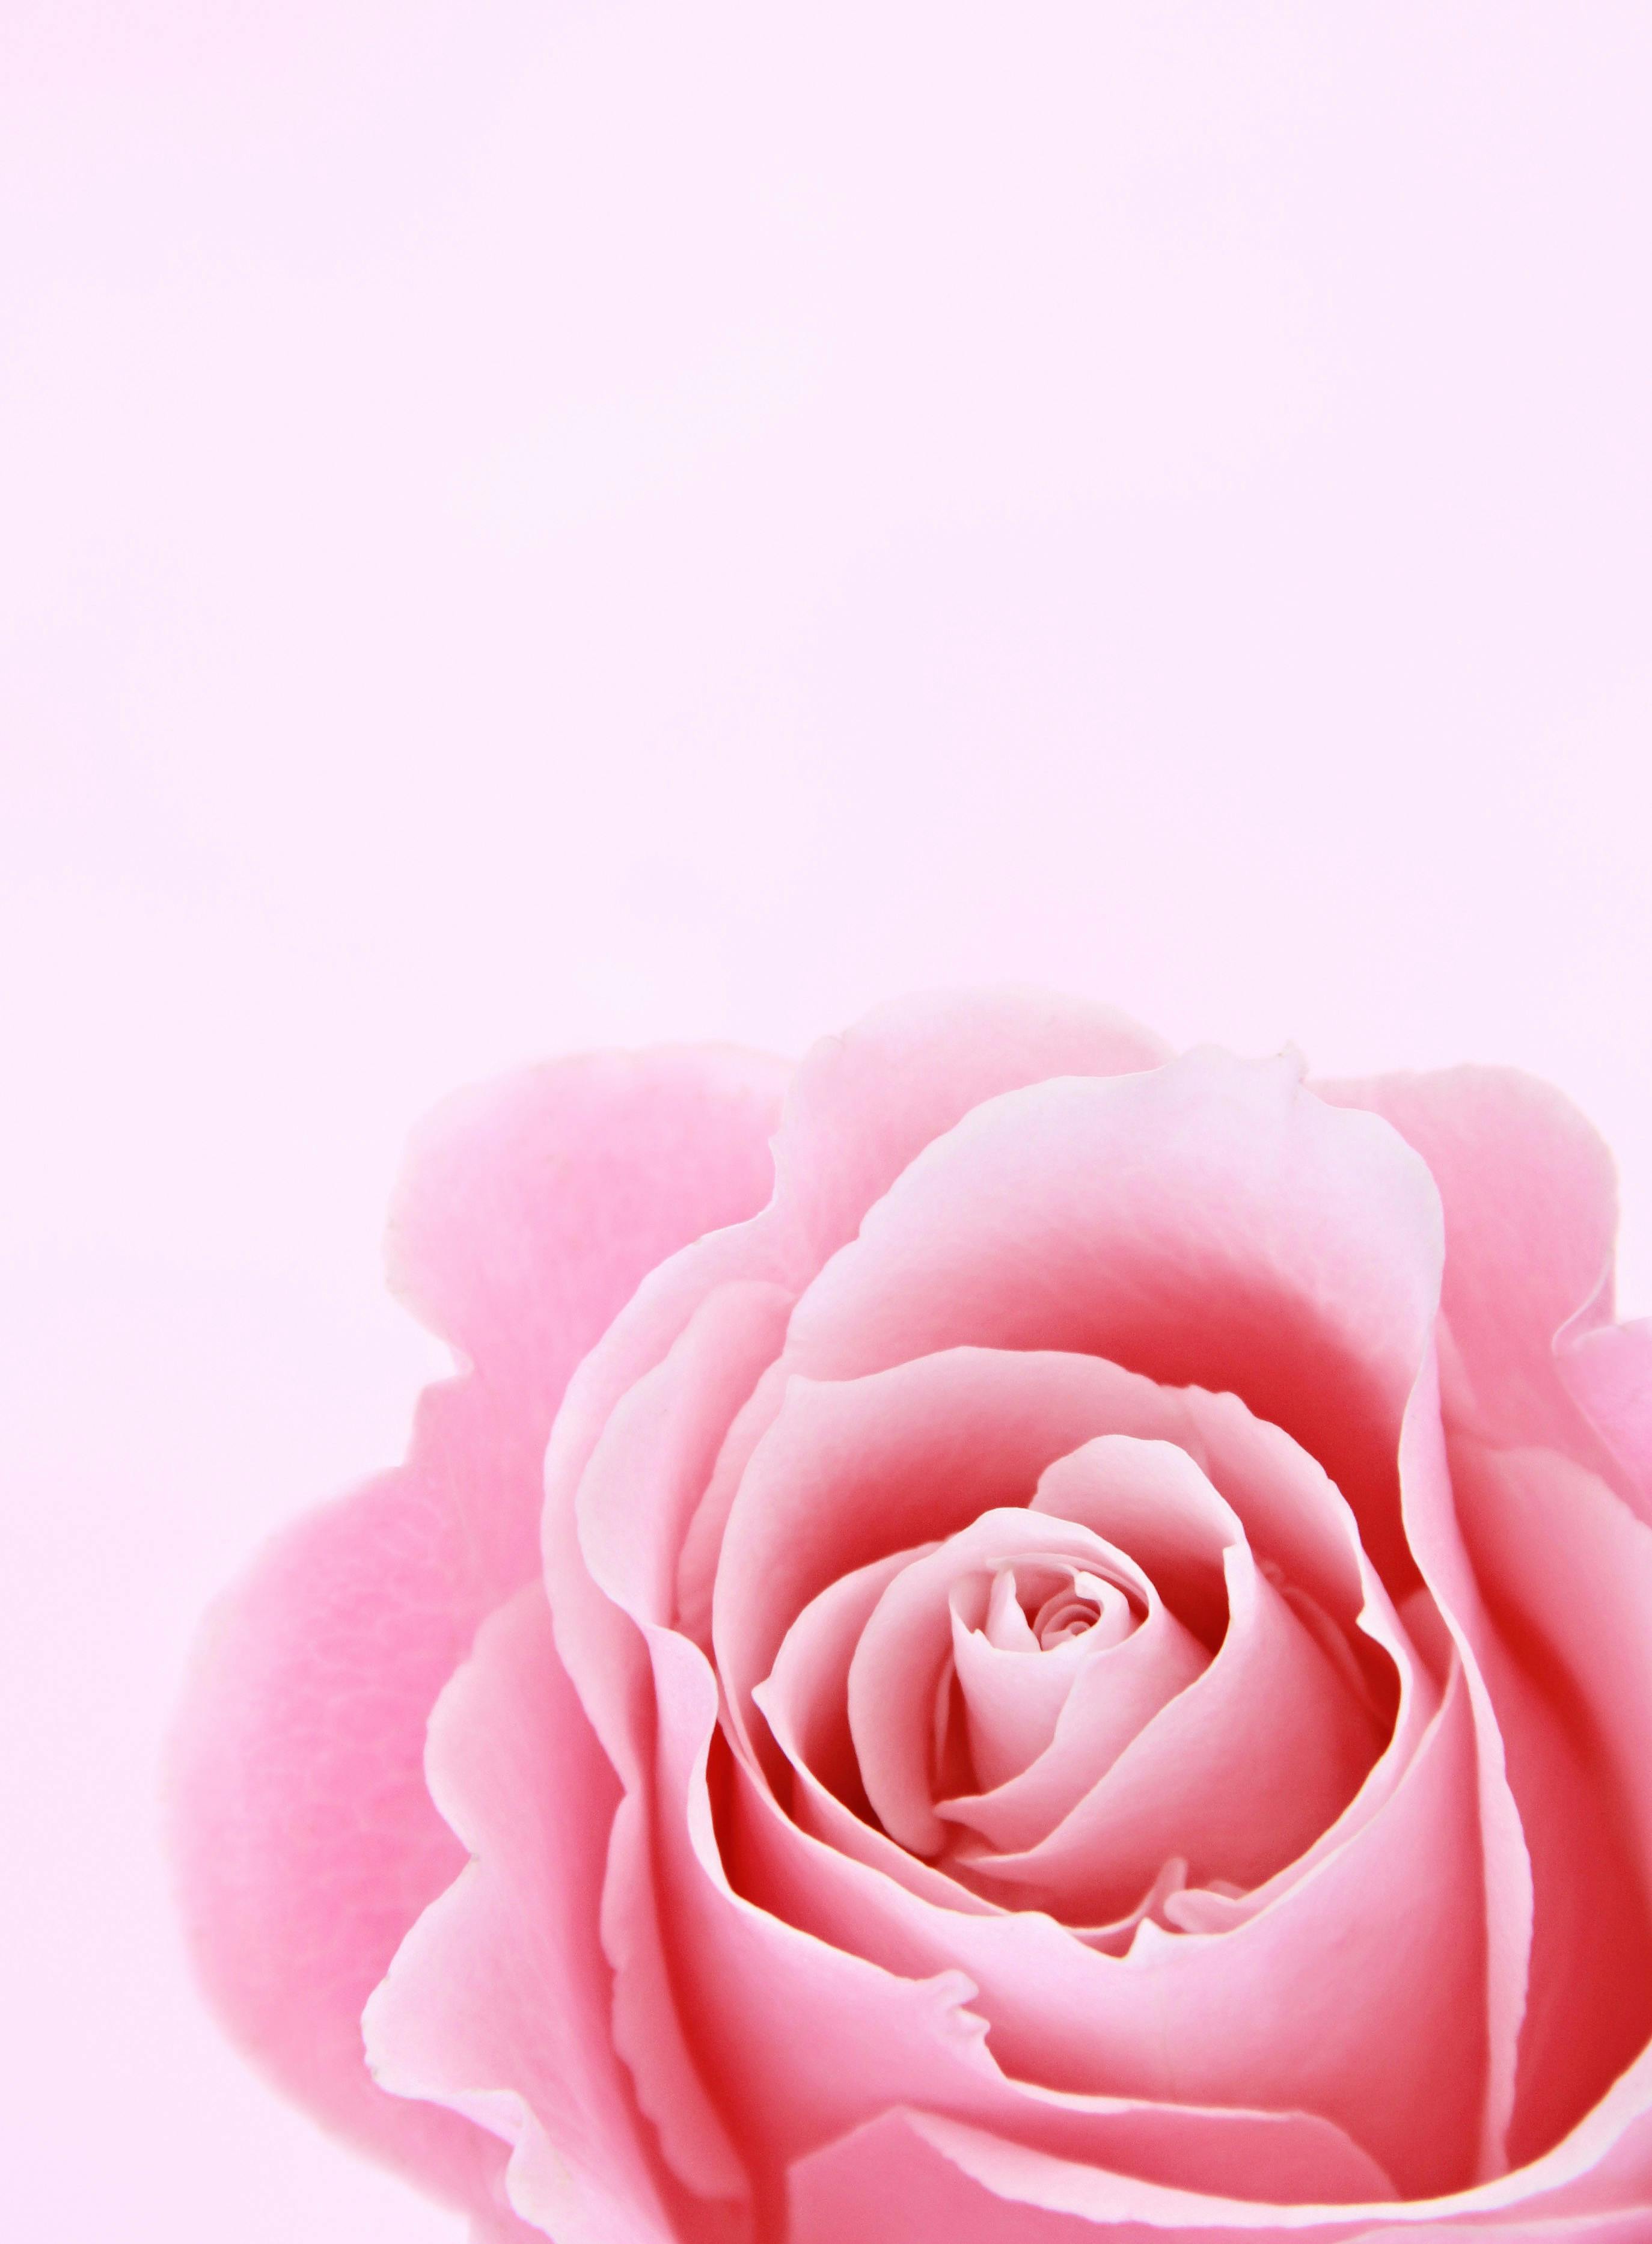 80,000+ Best Pink Flowers Images · 100% Royalty Free Photo Downloads ·  Pexels · Free Stock Photos